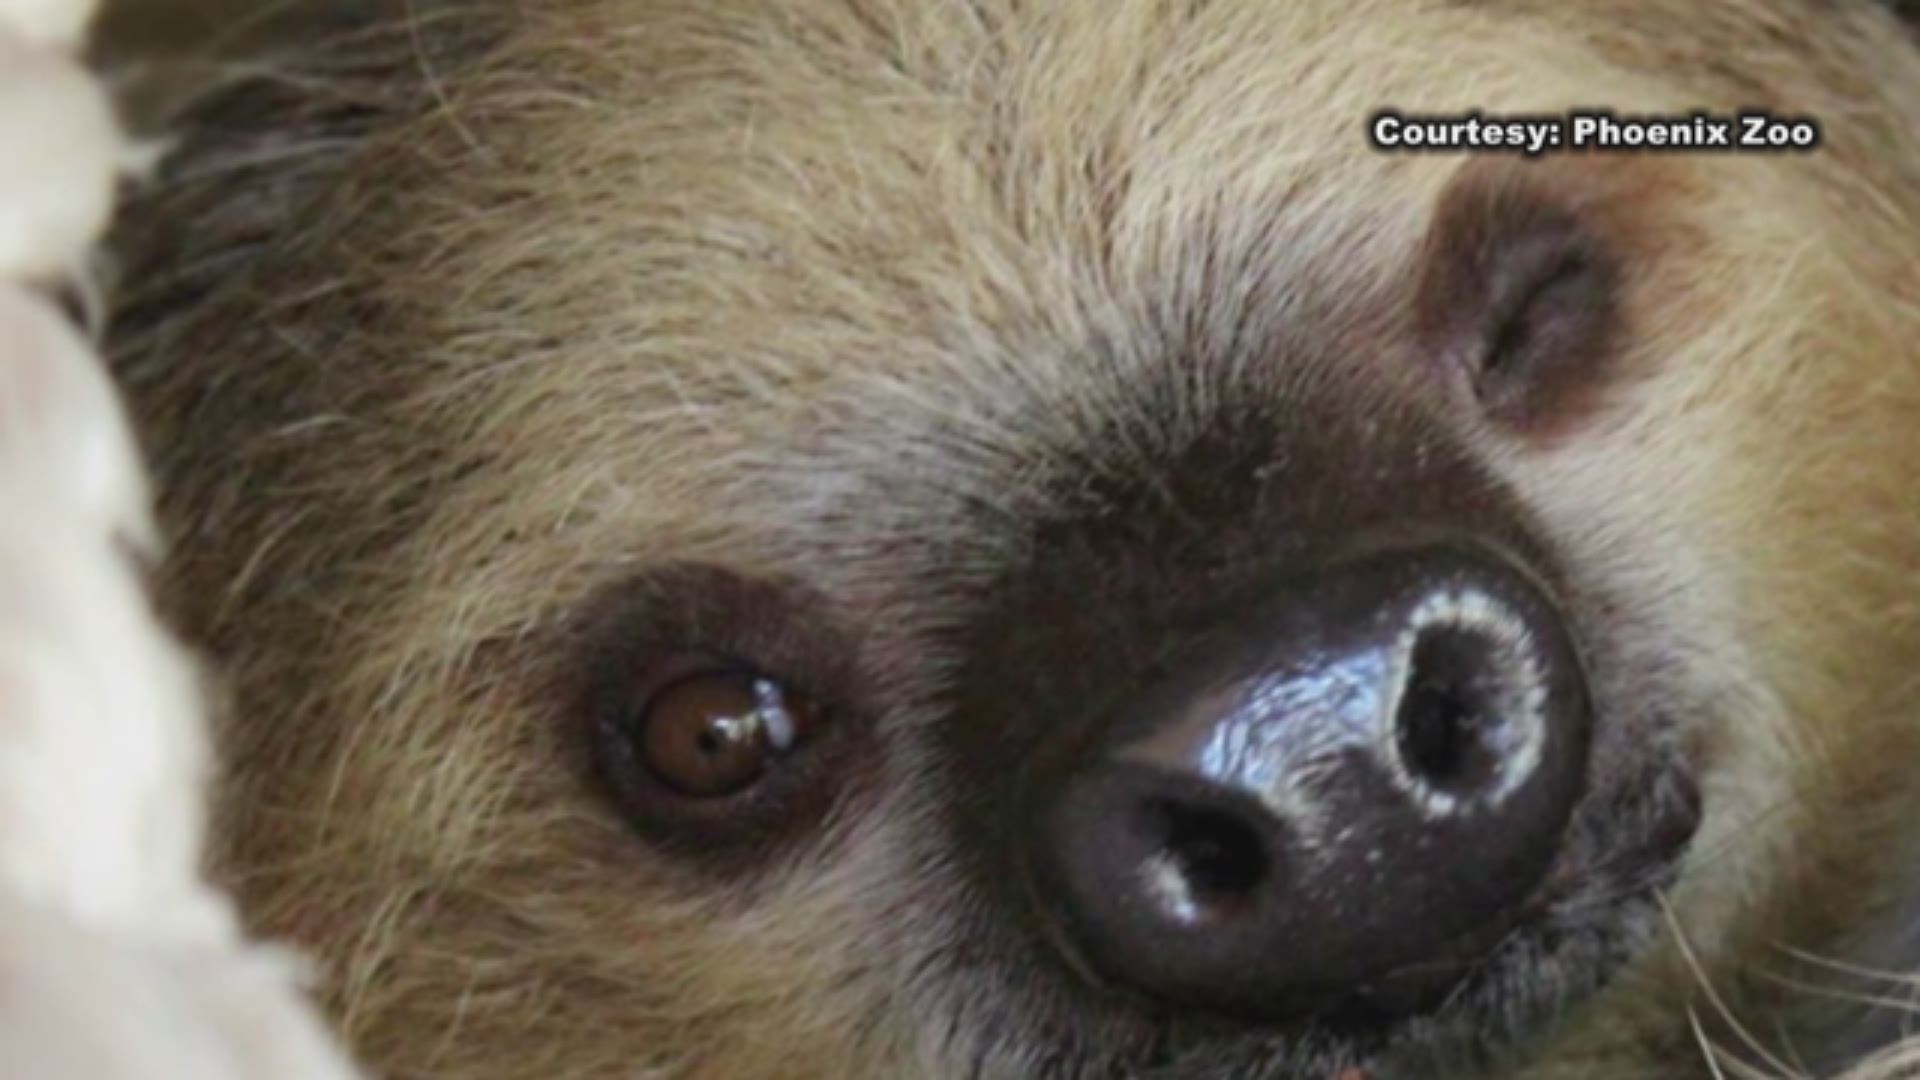 The first sloth to reside at Phoenix Zoo will soon make his debut in the Forest of Uco trail.